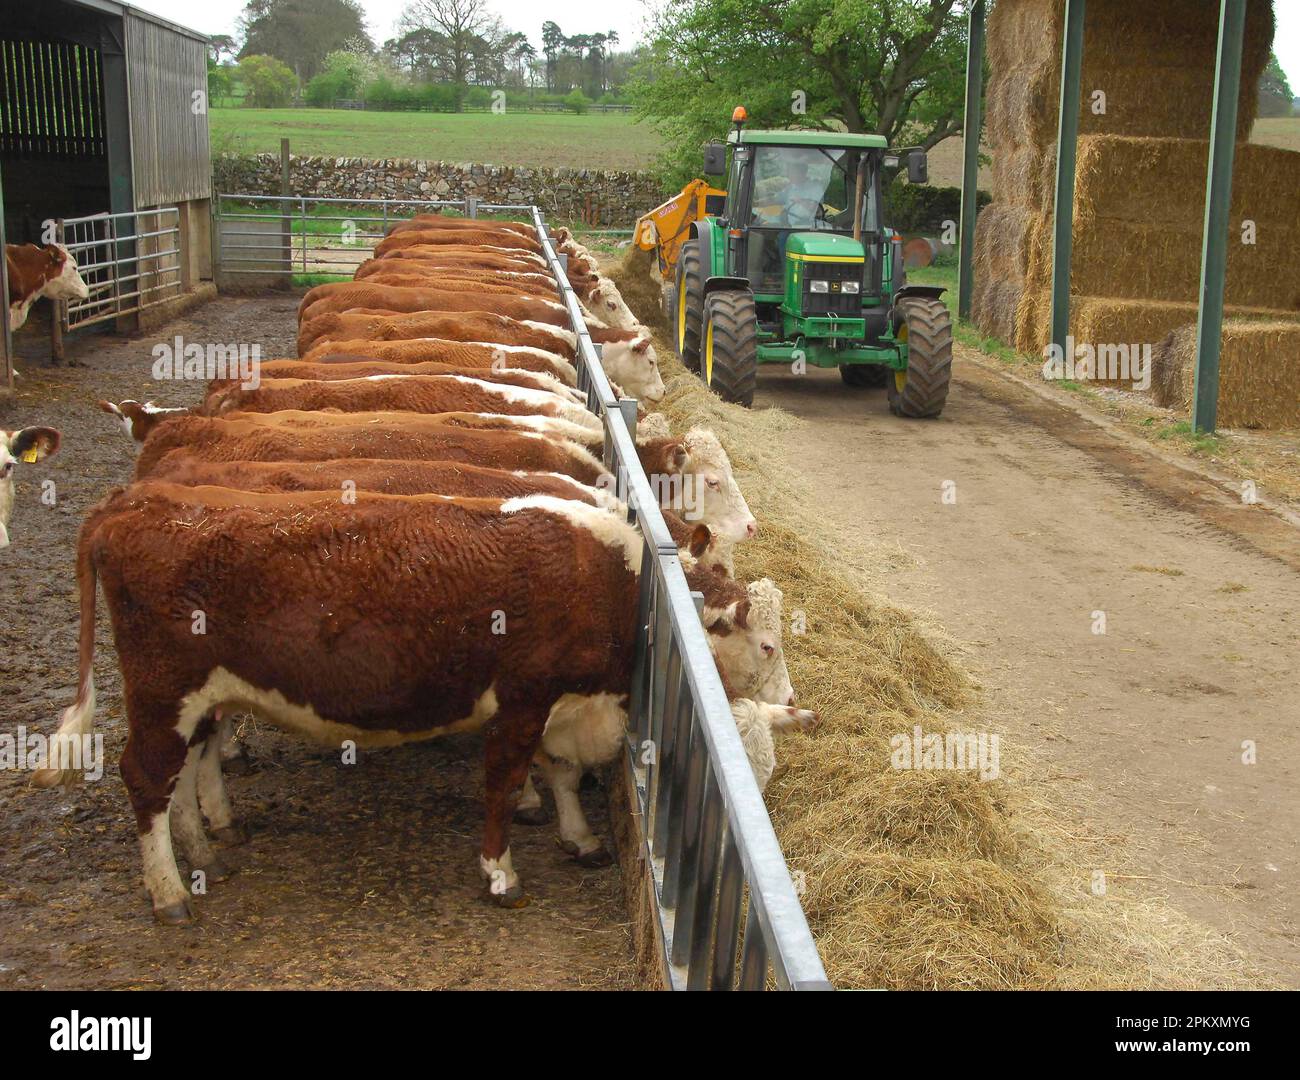 Domestic cattle, Hereford herd, suckler cows feeding on silage at the feed barrier, tractor unloading silage, England, Great Britain Stock Photo